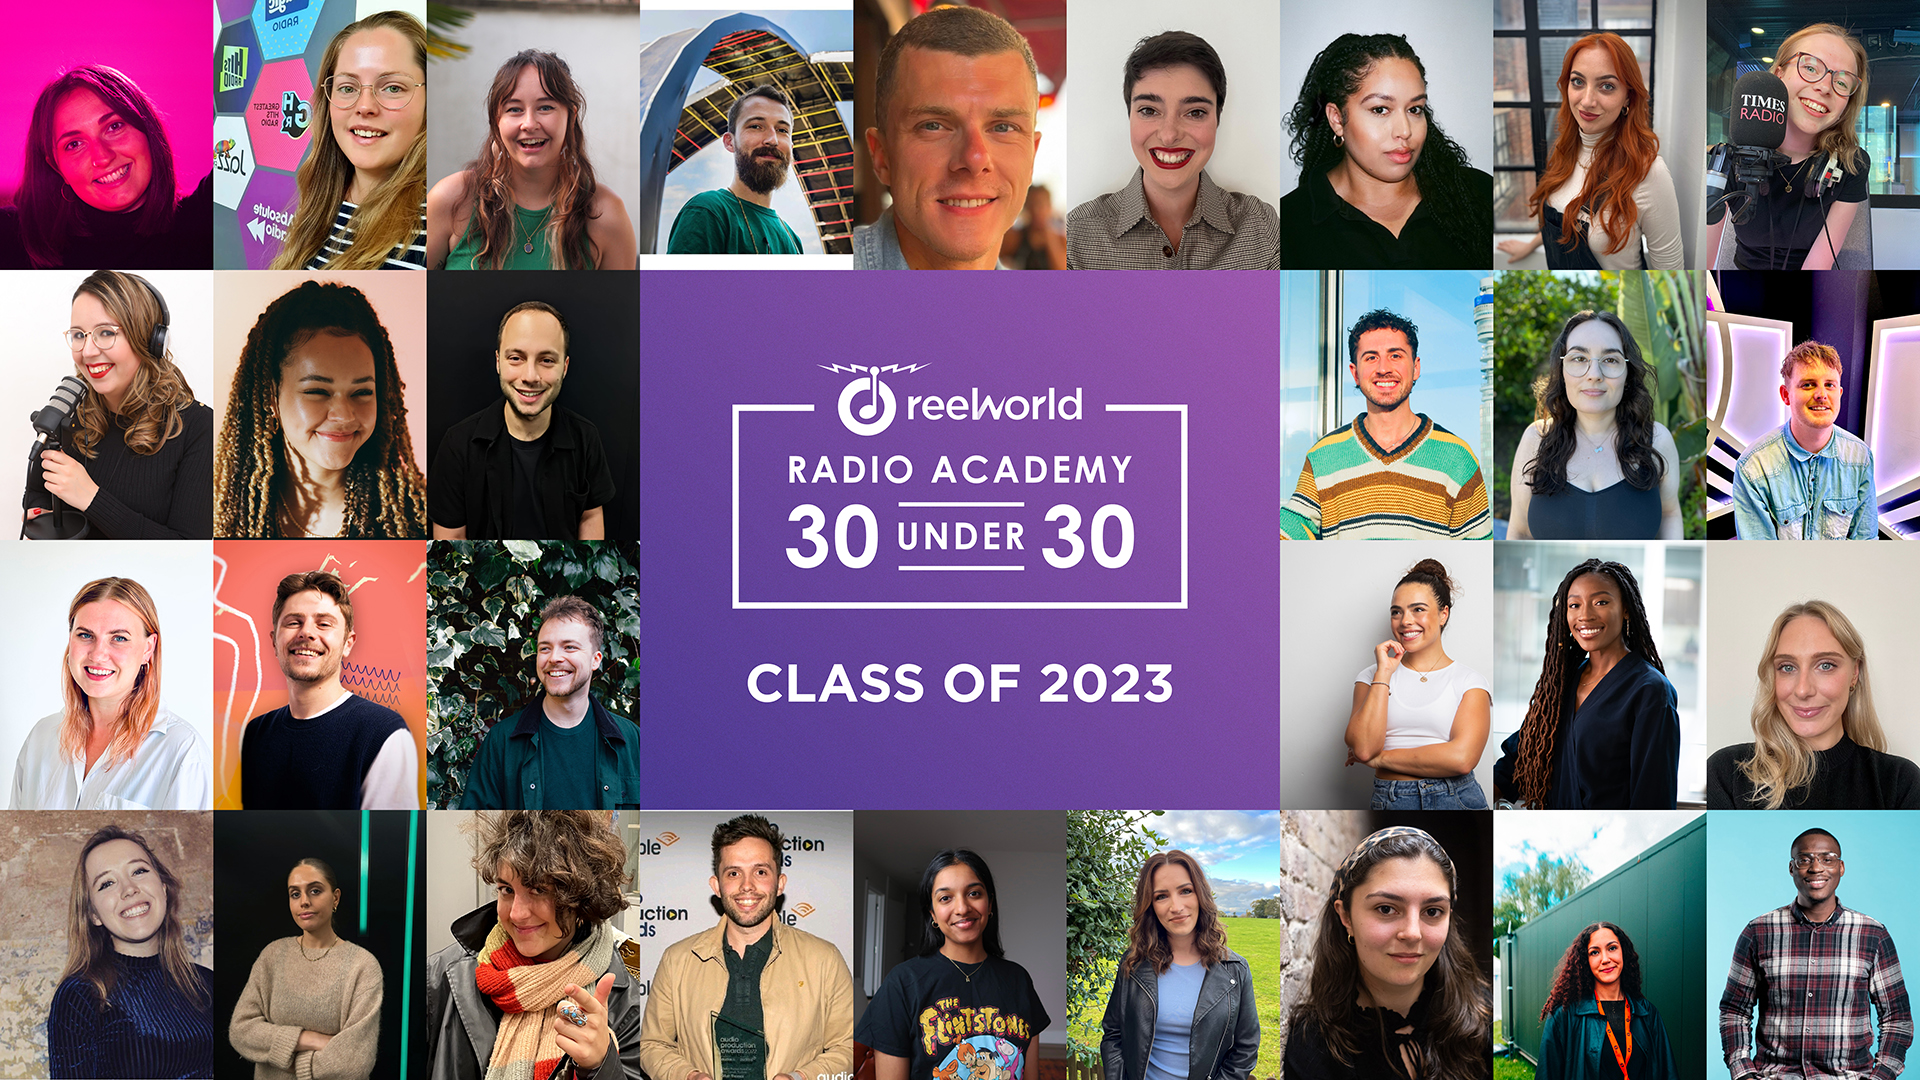 Picture of the headshots of all 30 who made the ReelWorld Radio Academy's '30 under 30' list for 2023.